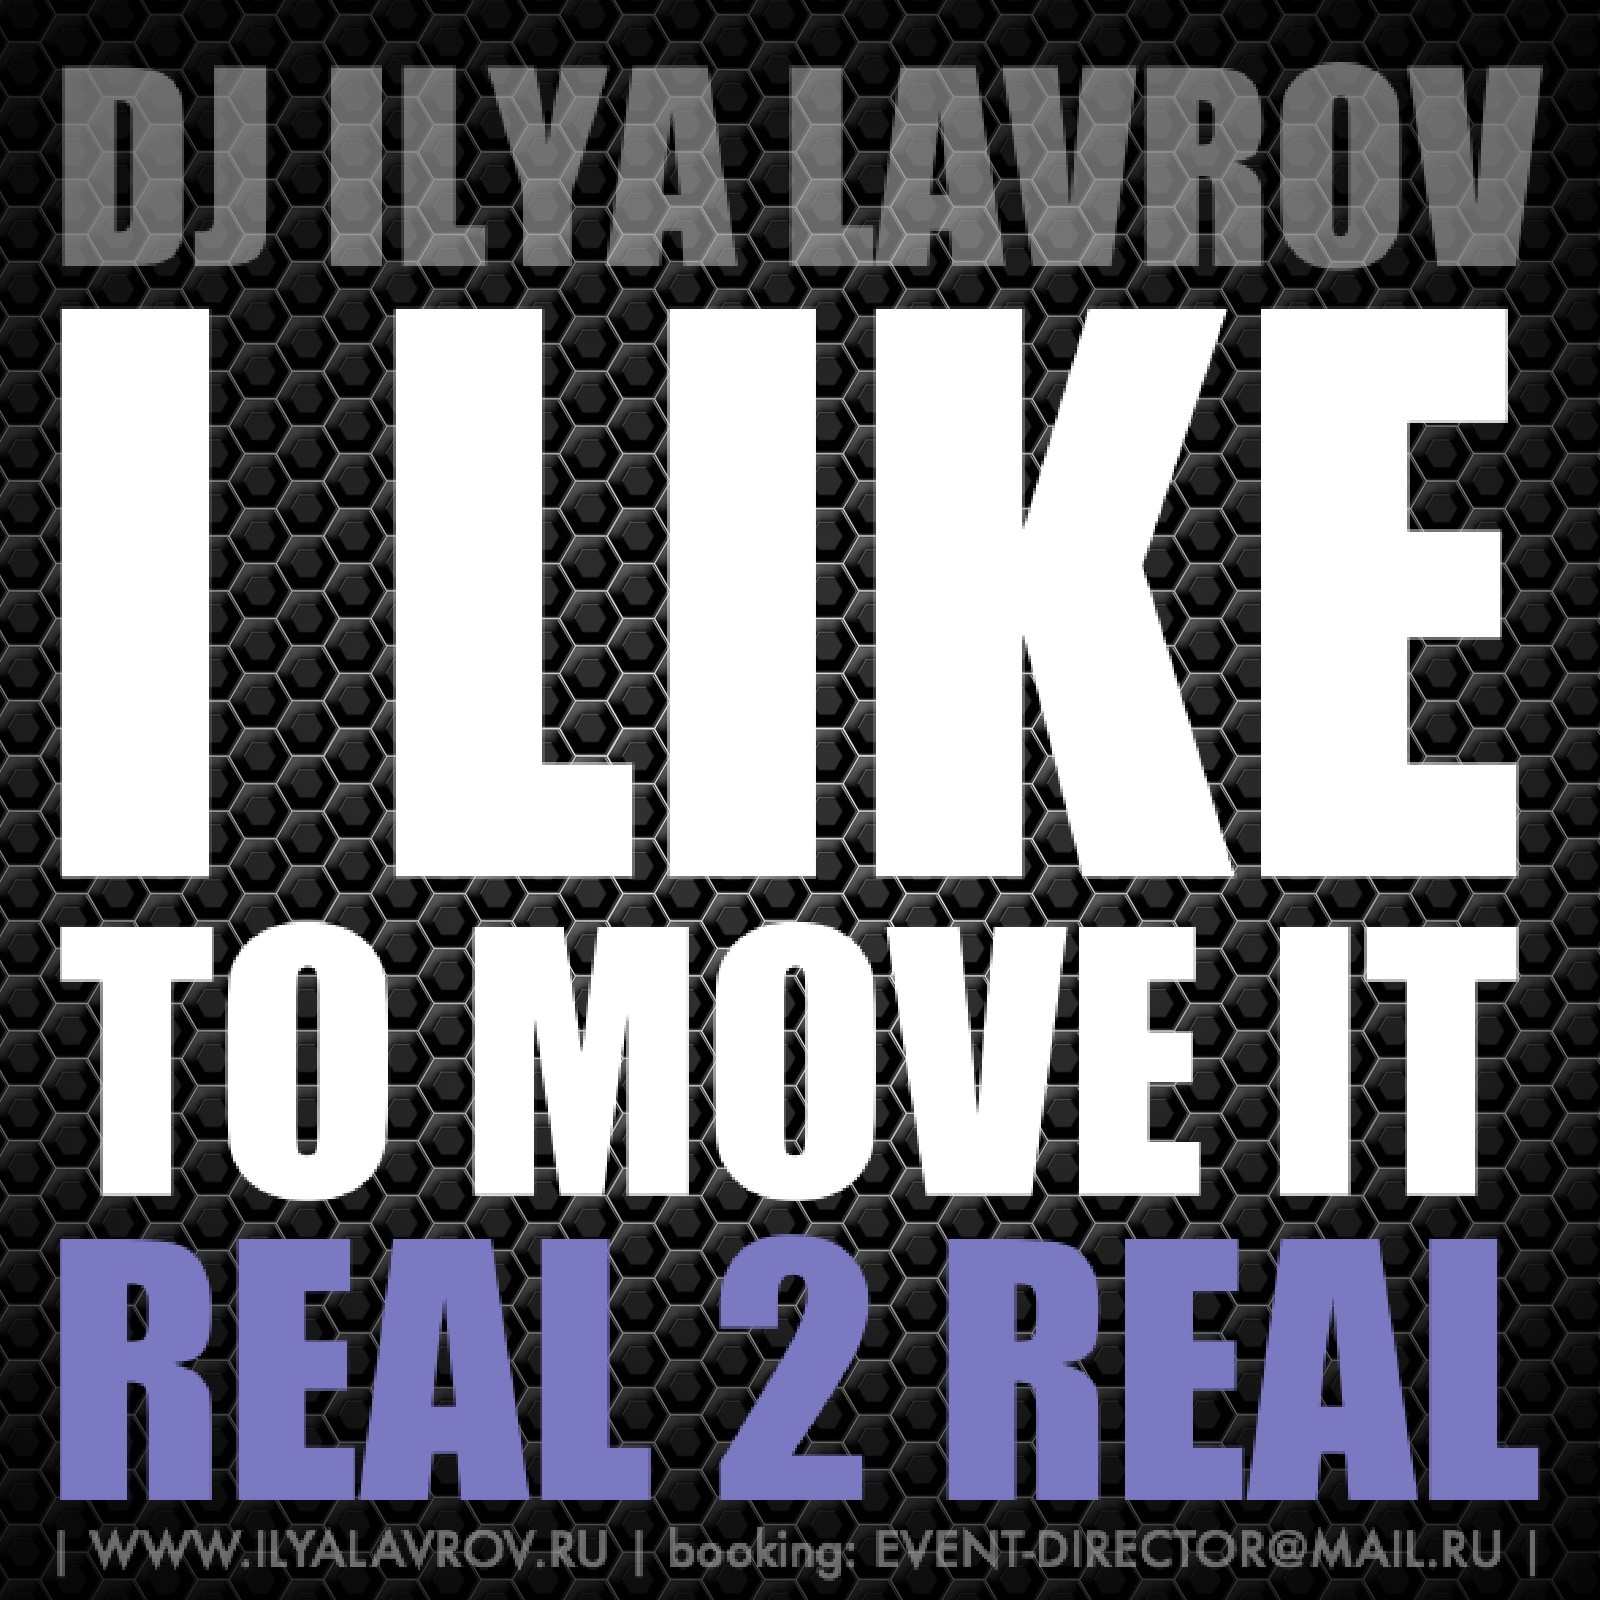 It really do be like that. Real to real i like to move it. I like to move it кто поет. Reel 2 real. I like to move it (Timber Remix). I like to move it картинки.